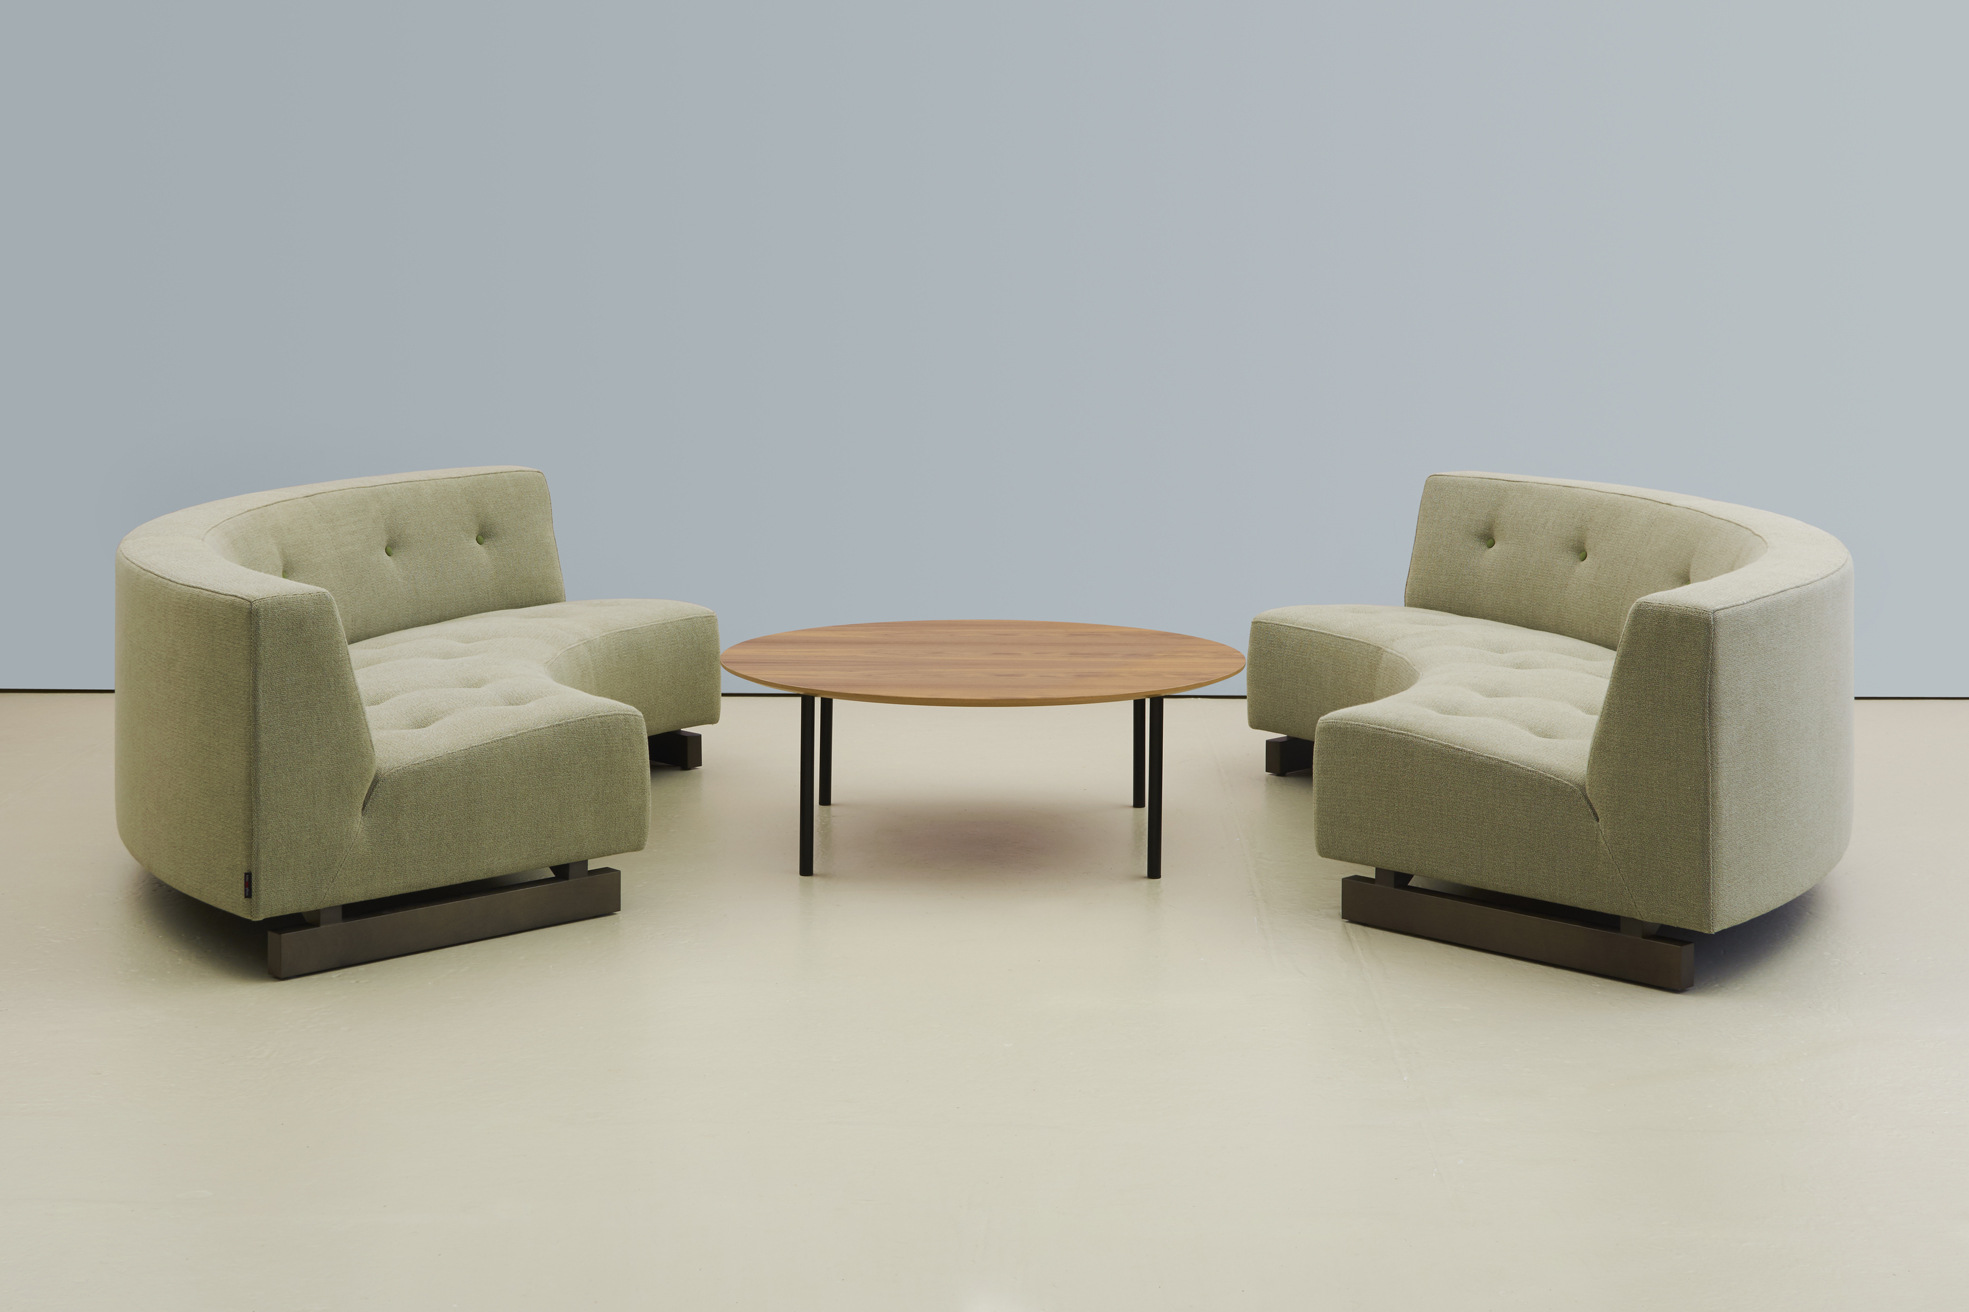 hm46v1 curved sofa with hm18z table (2) (low res).jpg